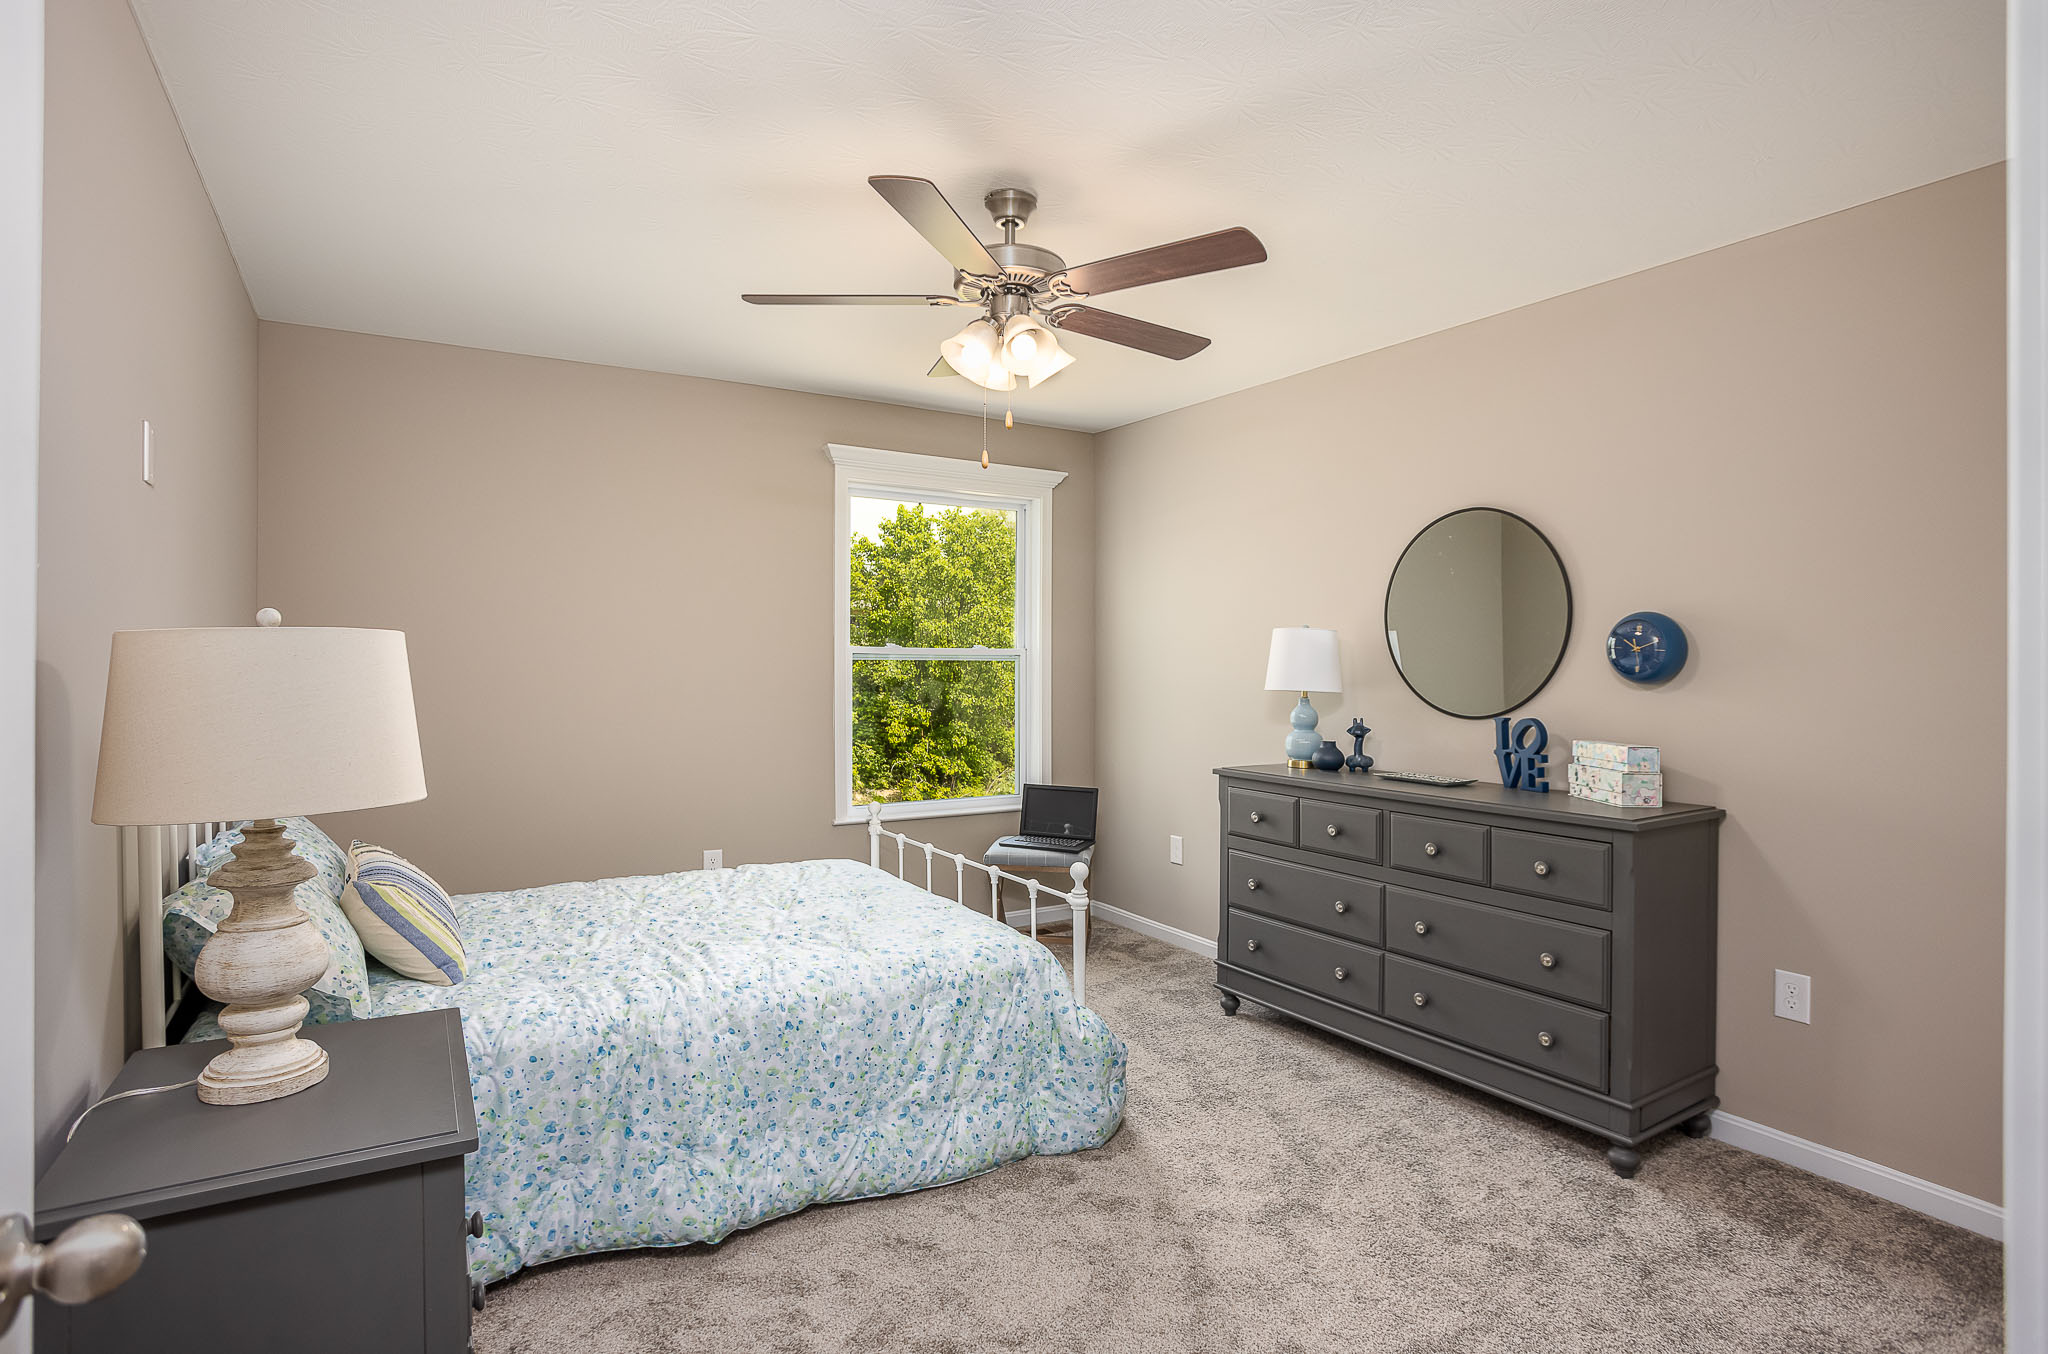 Third bedroom of a new home in Monroe, OH